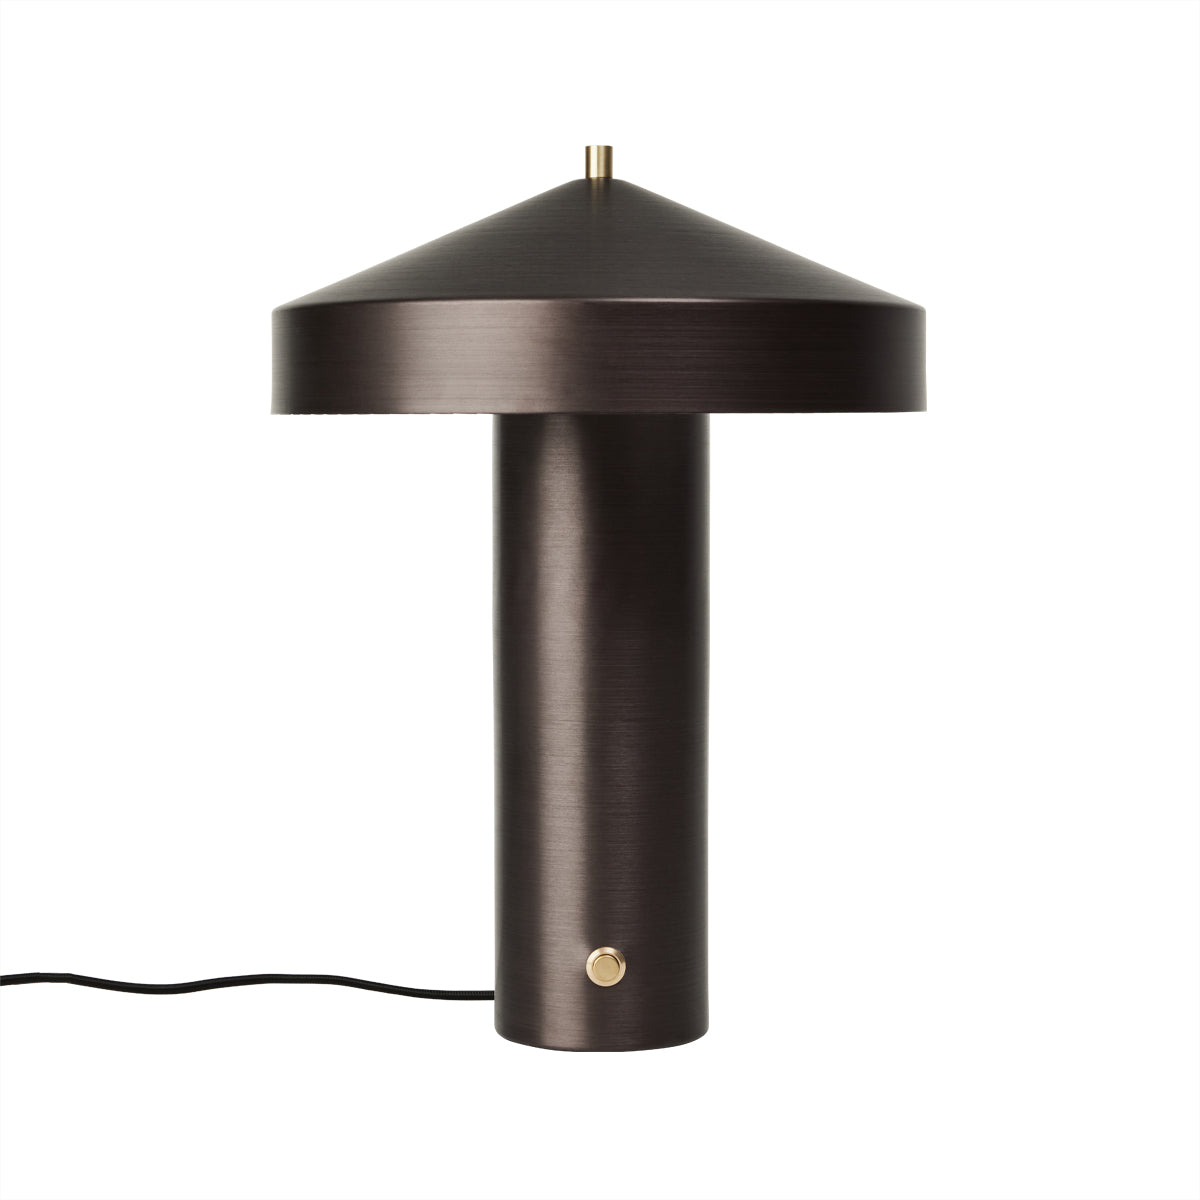 OYOY LIVING Hatto Table Lamp (EU) Table Lamp 301 Browned Brass